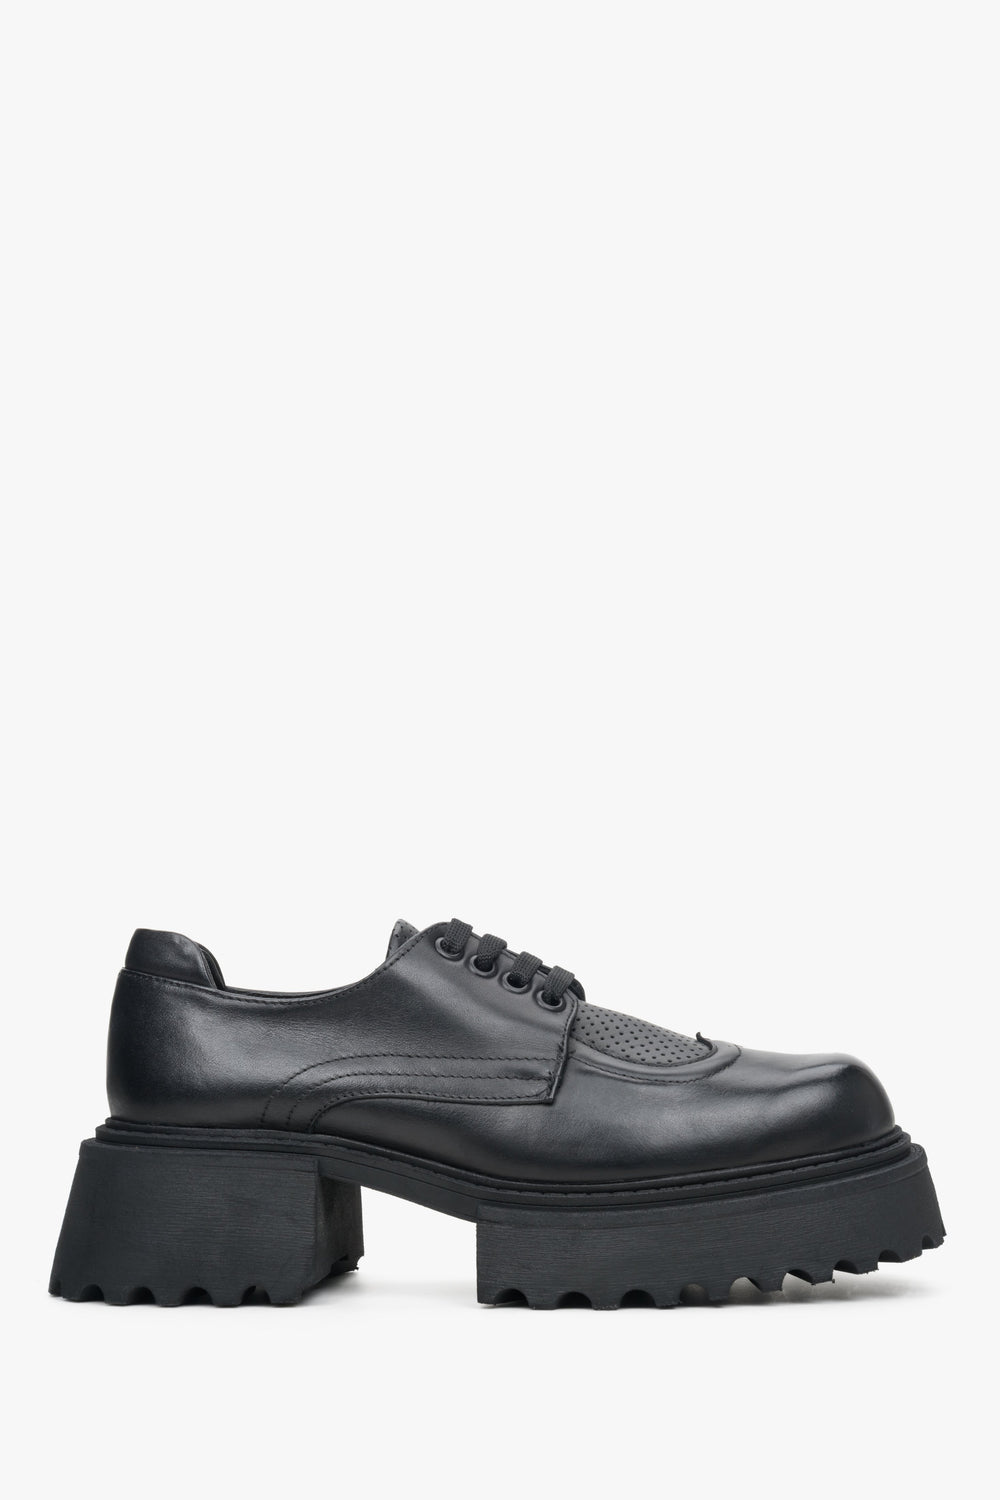 Women's Black Leather Brogues with Chunky Sole Estro ER00113784.